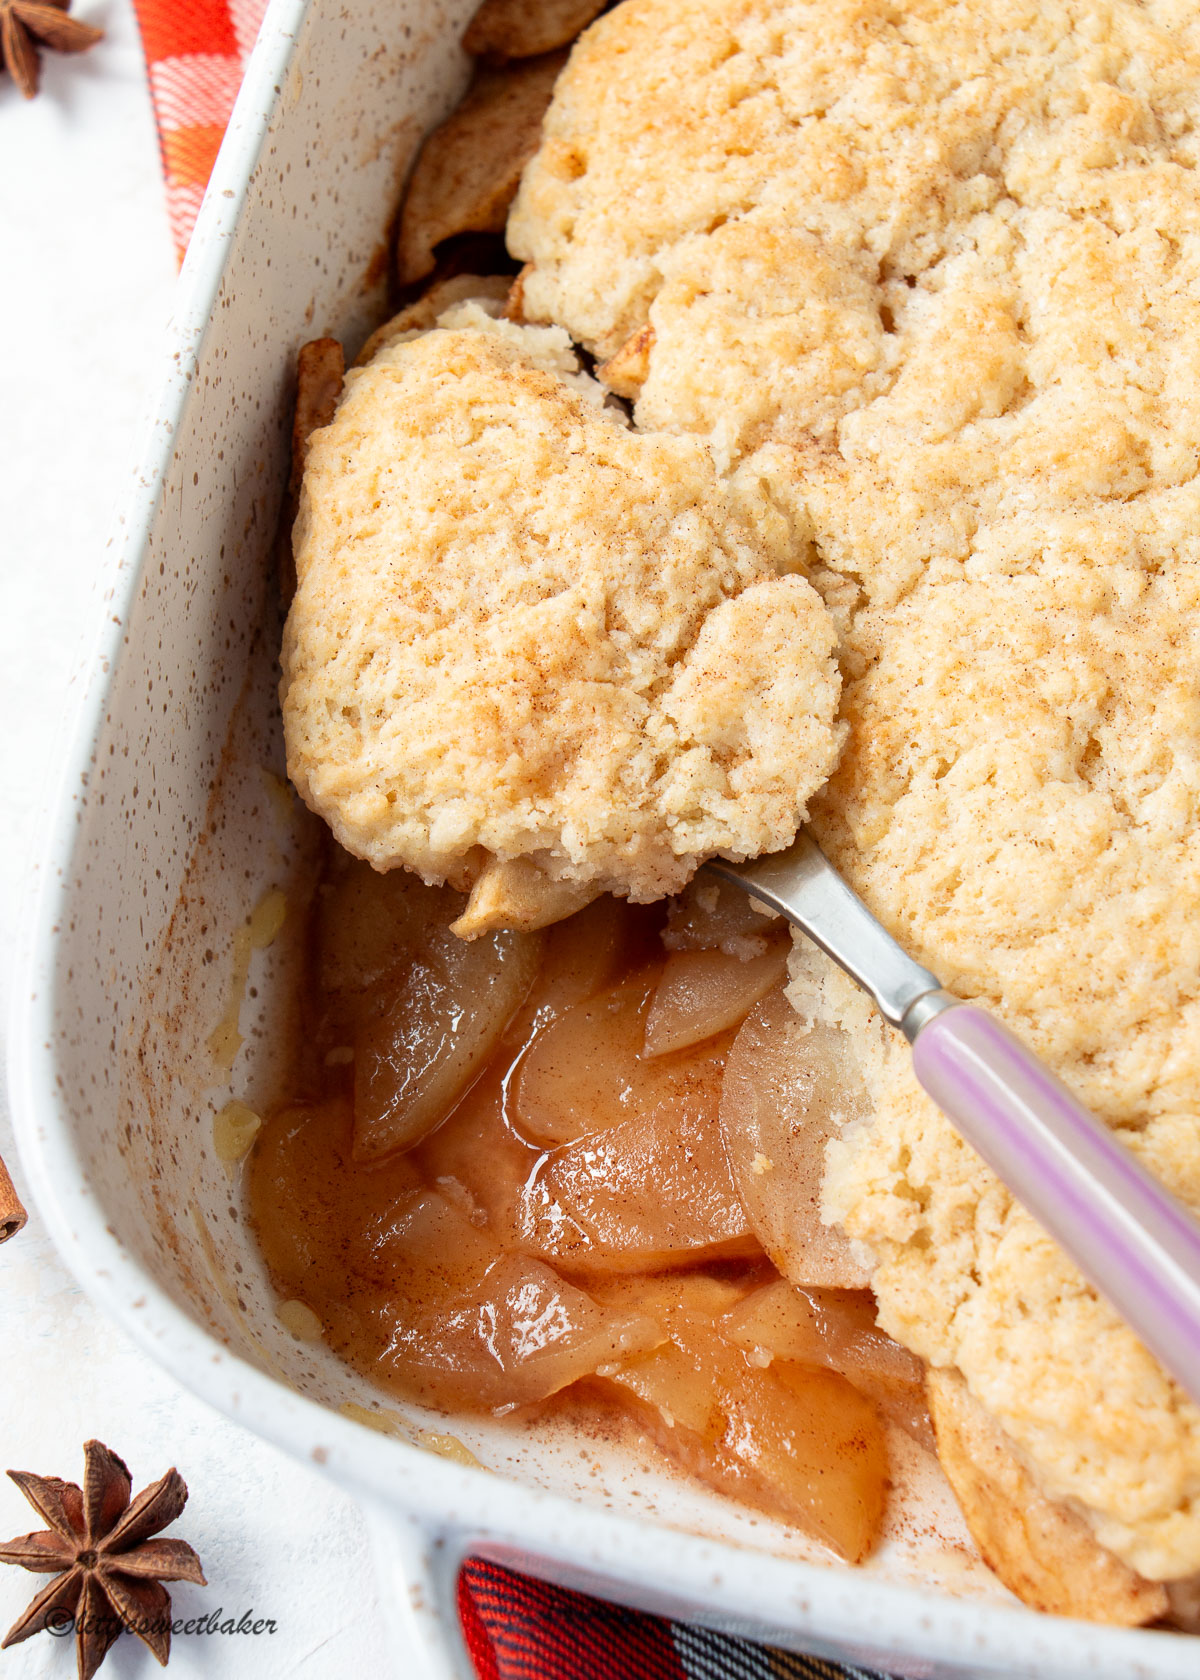 A close up of a dish of apple cobbler showing the apple filling.